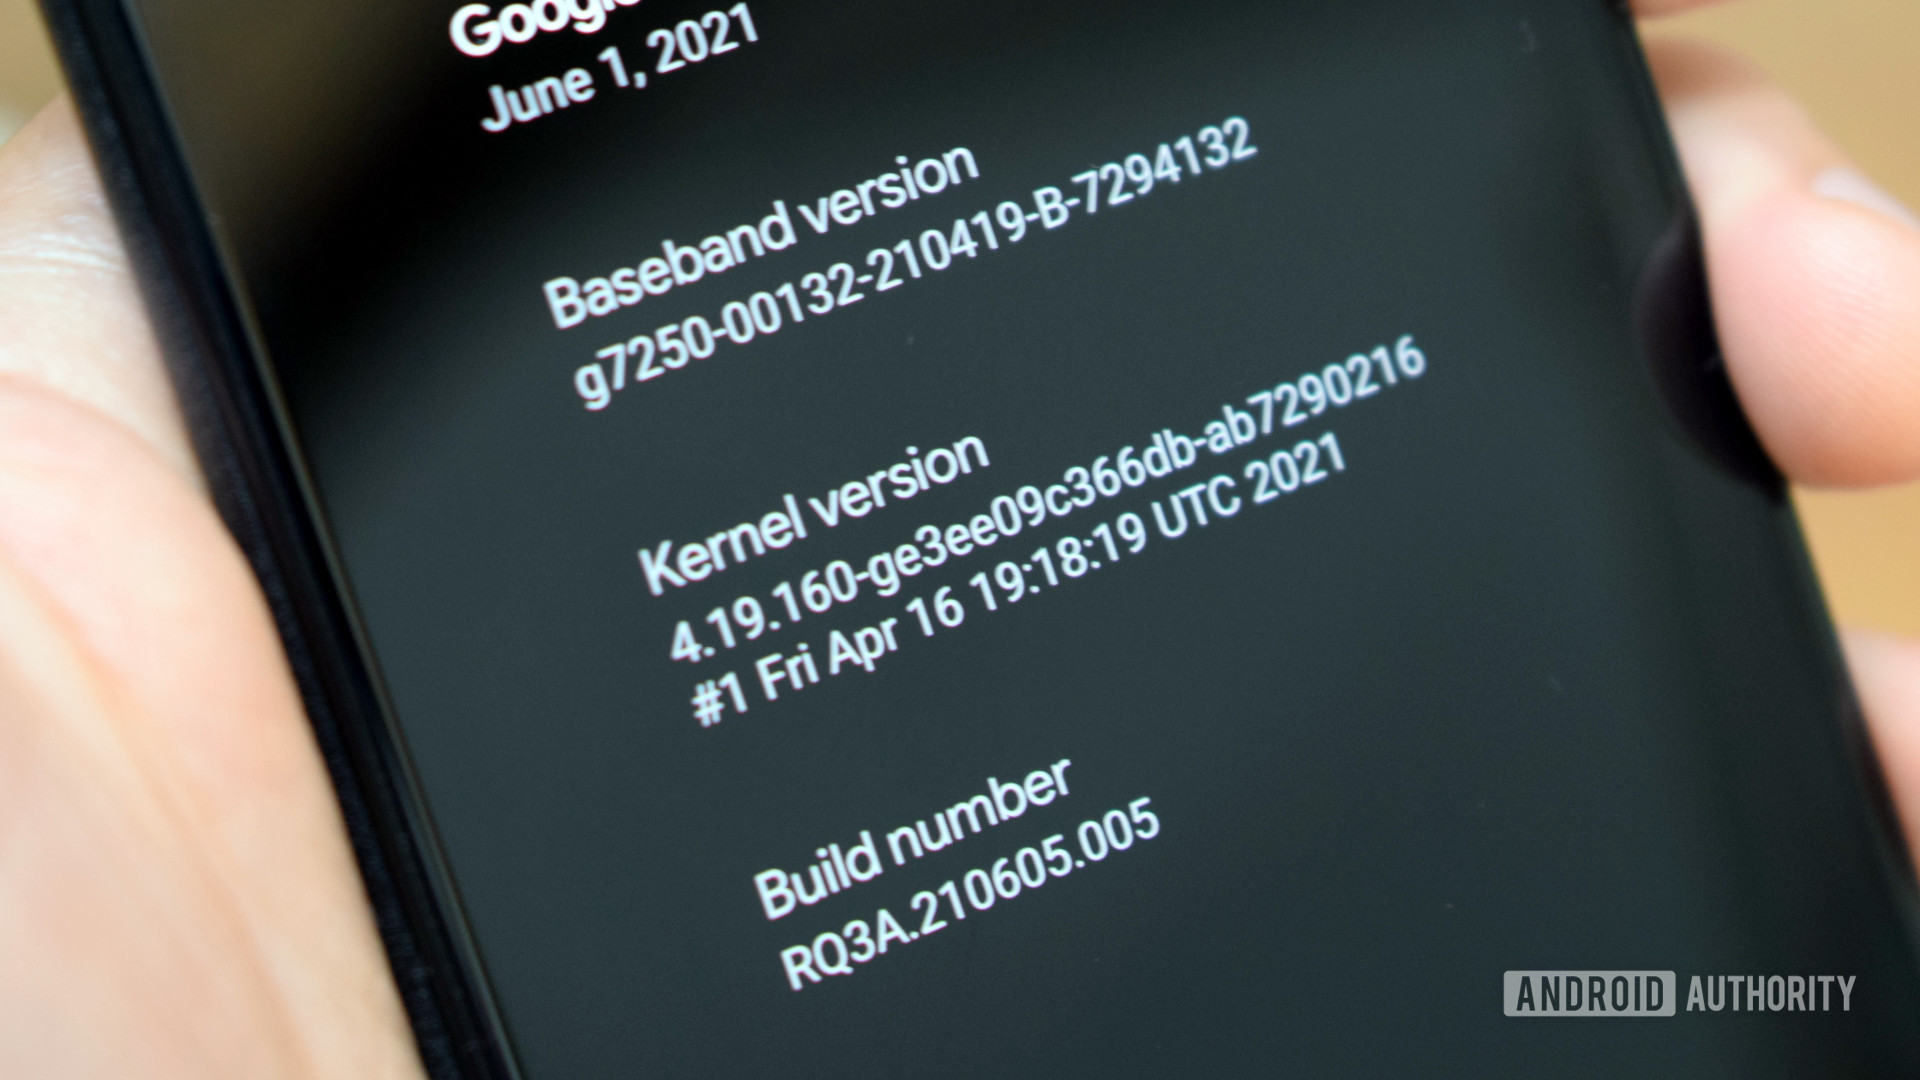 Android Linux Kernel version